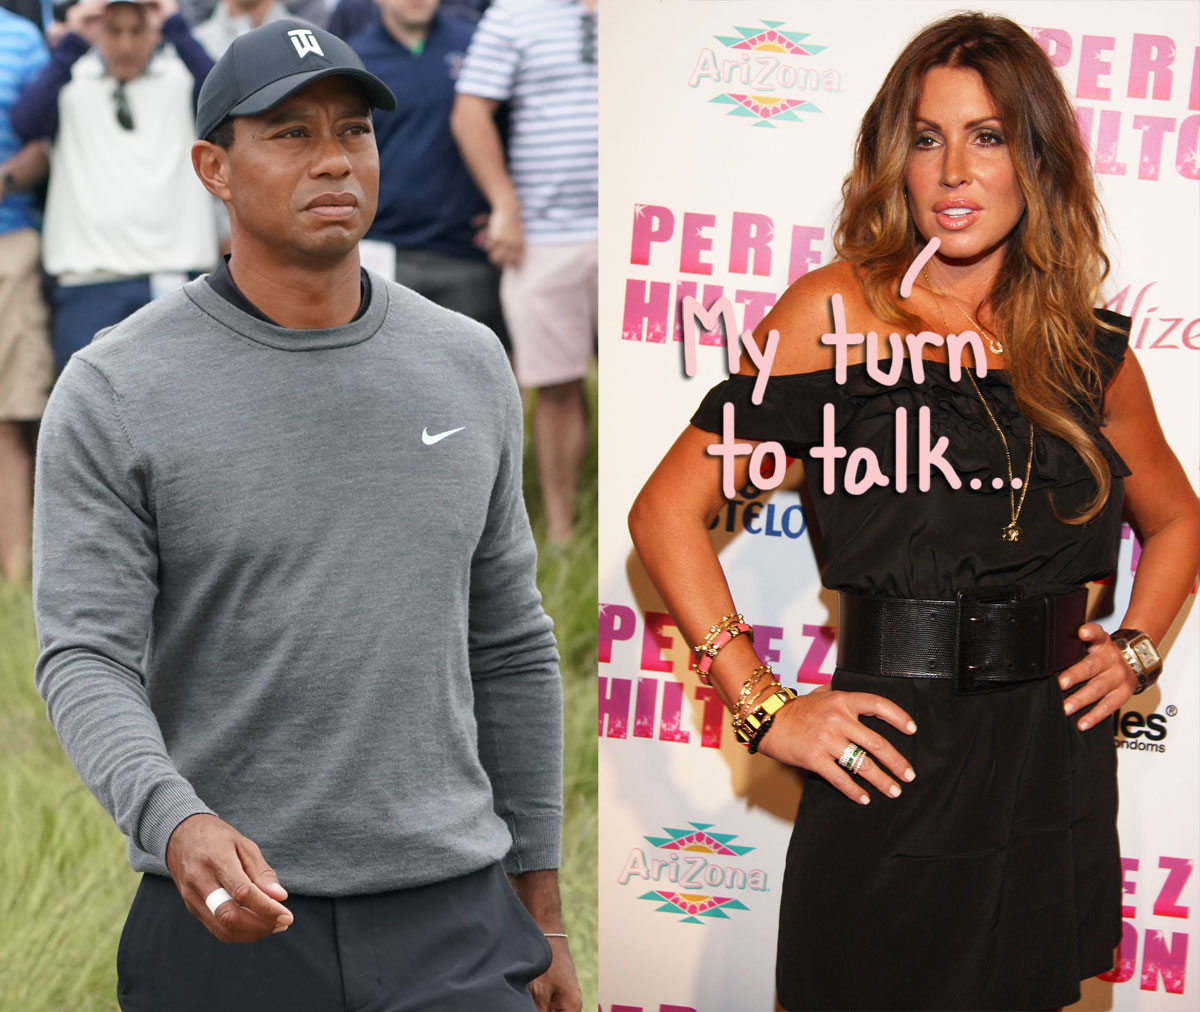 Tiger Woods Mistress Reveals His Last Text To Her In Upcoming Tell-All Documentary, And HOO BOY! pic